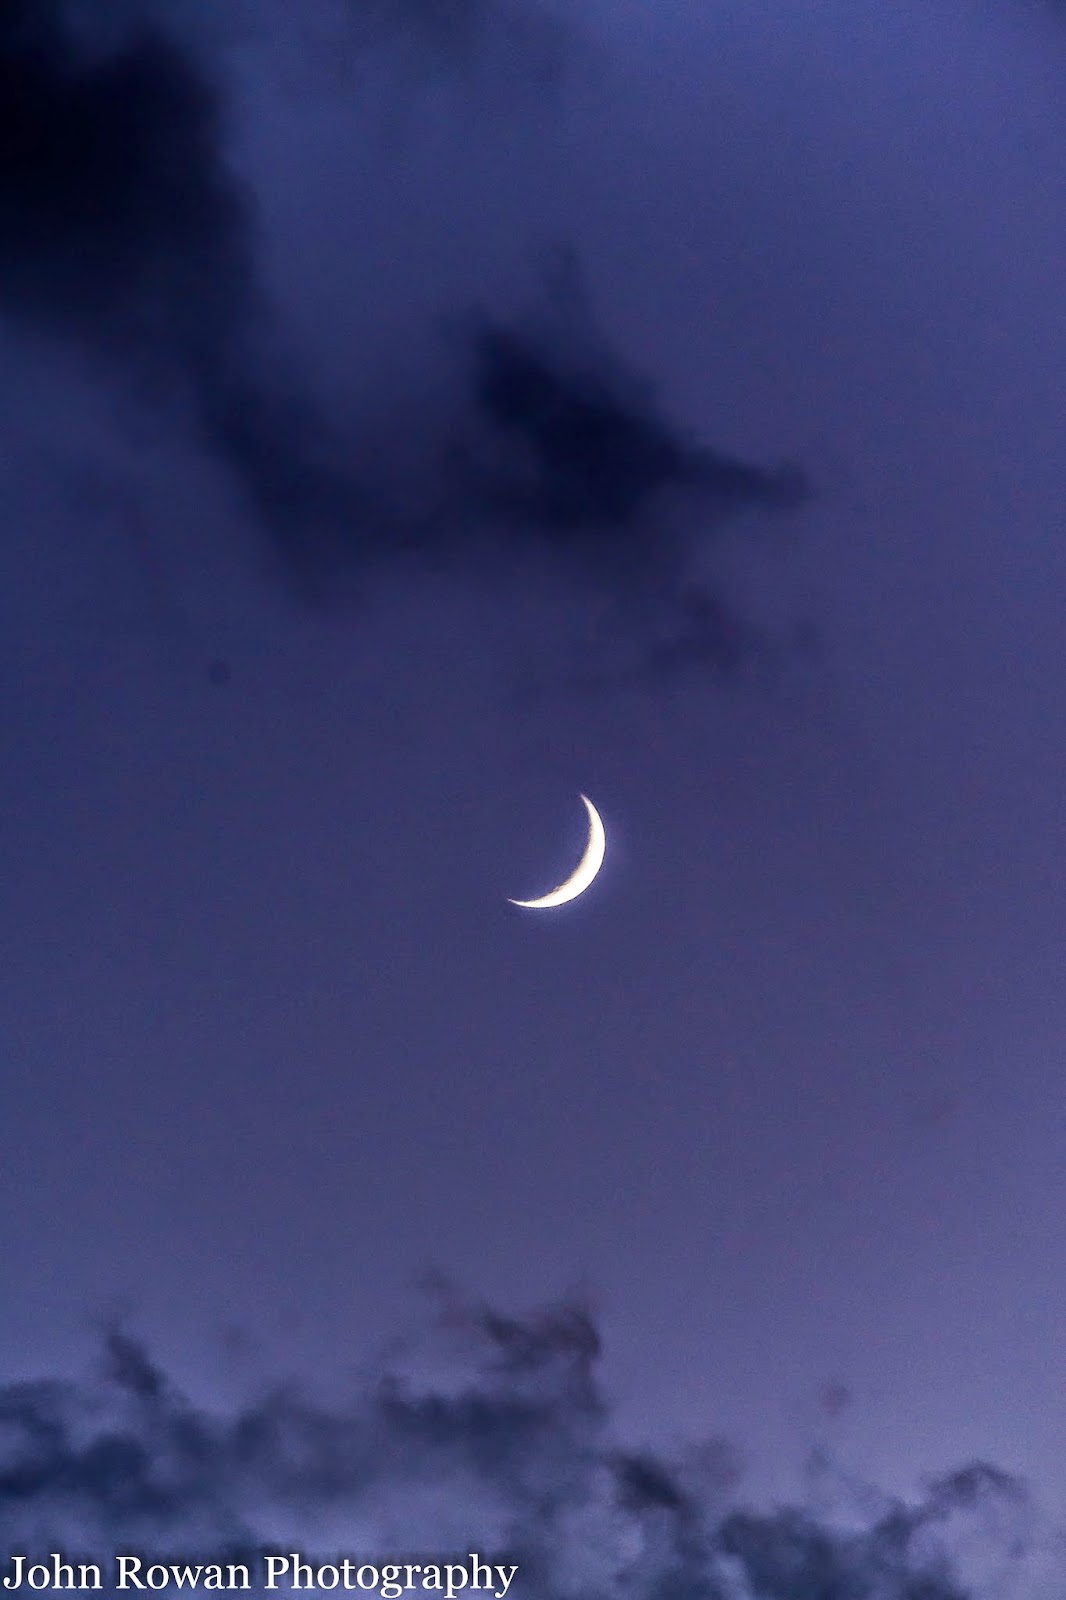 A Wiccan in Kyoto: Crescent Moon over Kyoto